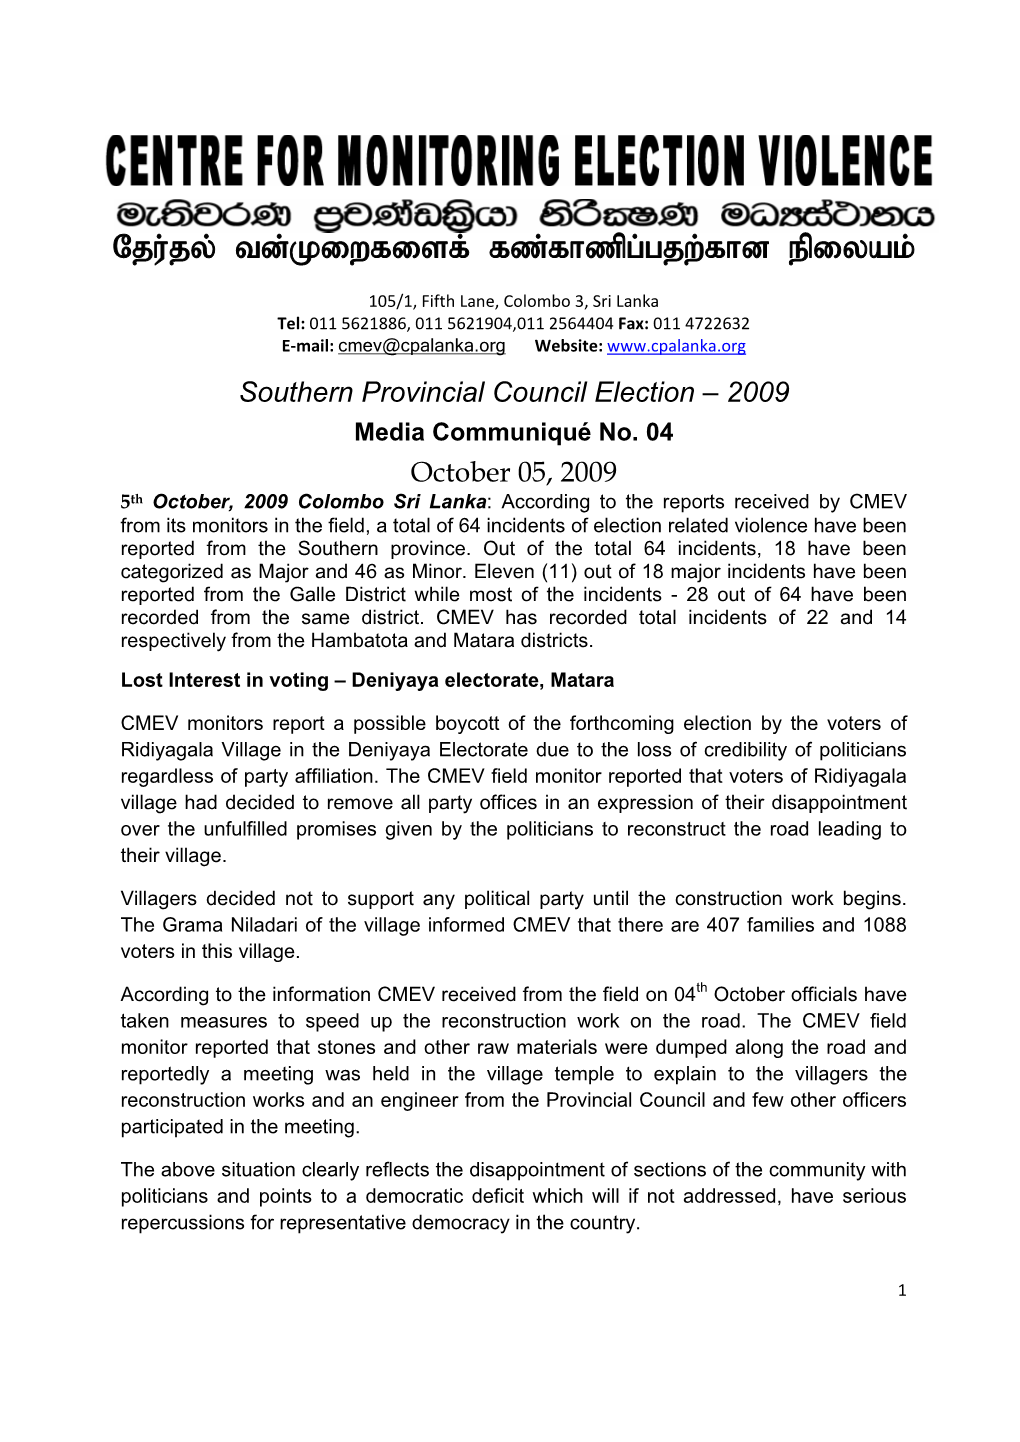 Southern Provincial Council Election – 2009